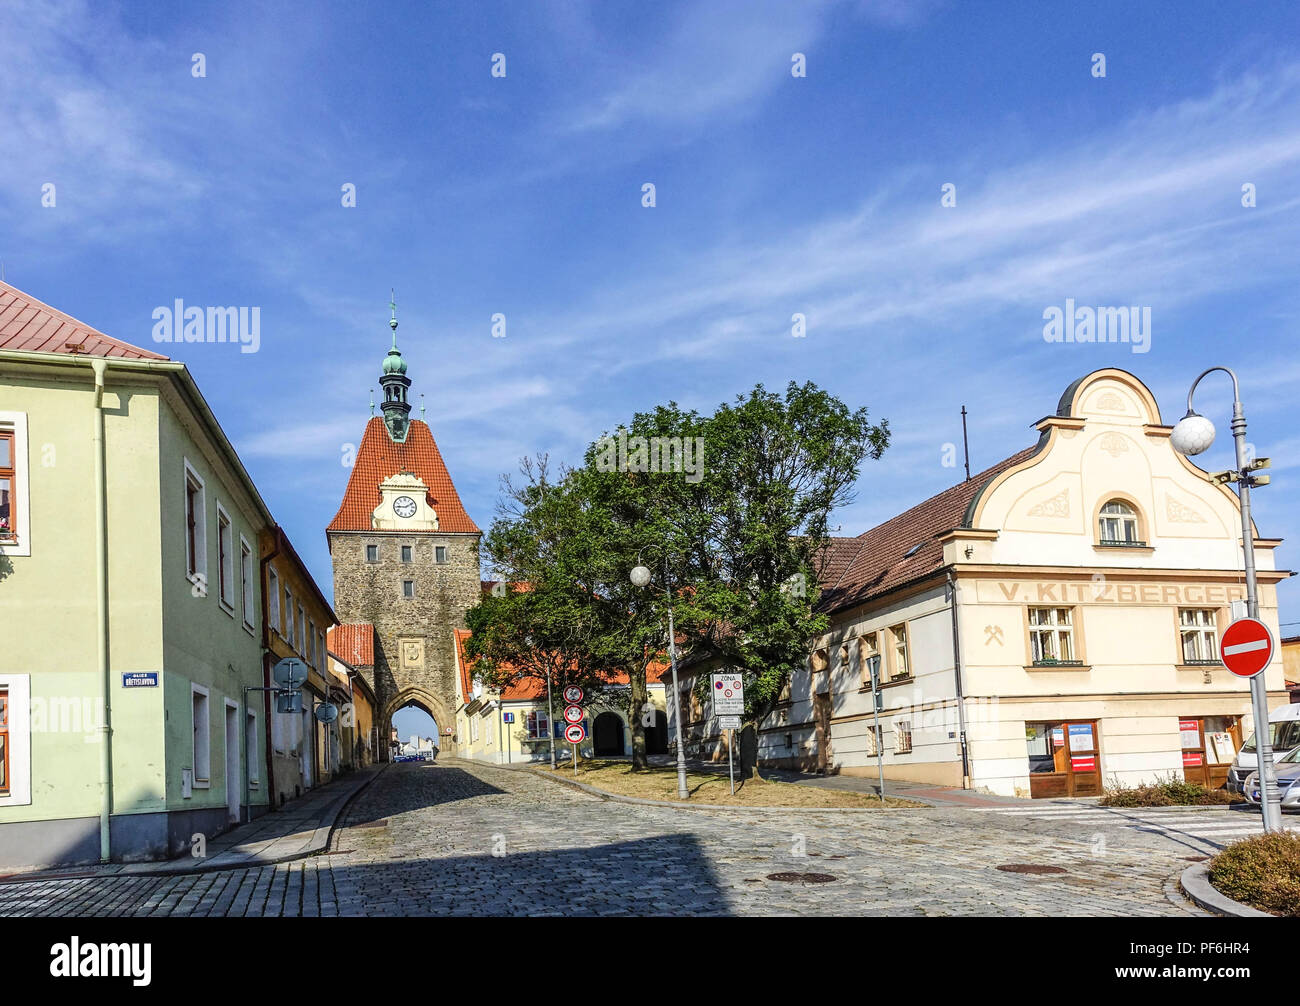 Chodsko High Resolution Stock Photography and Images - Alamy